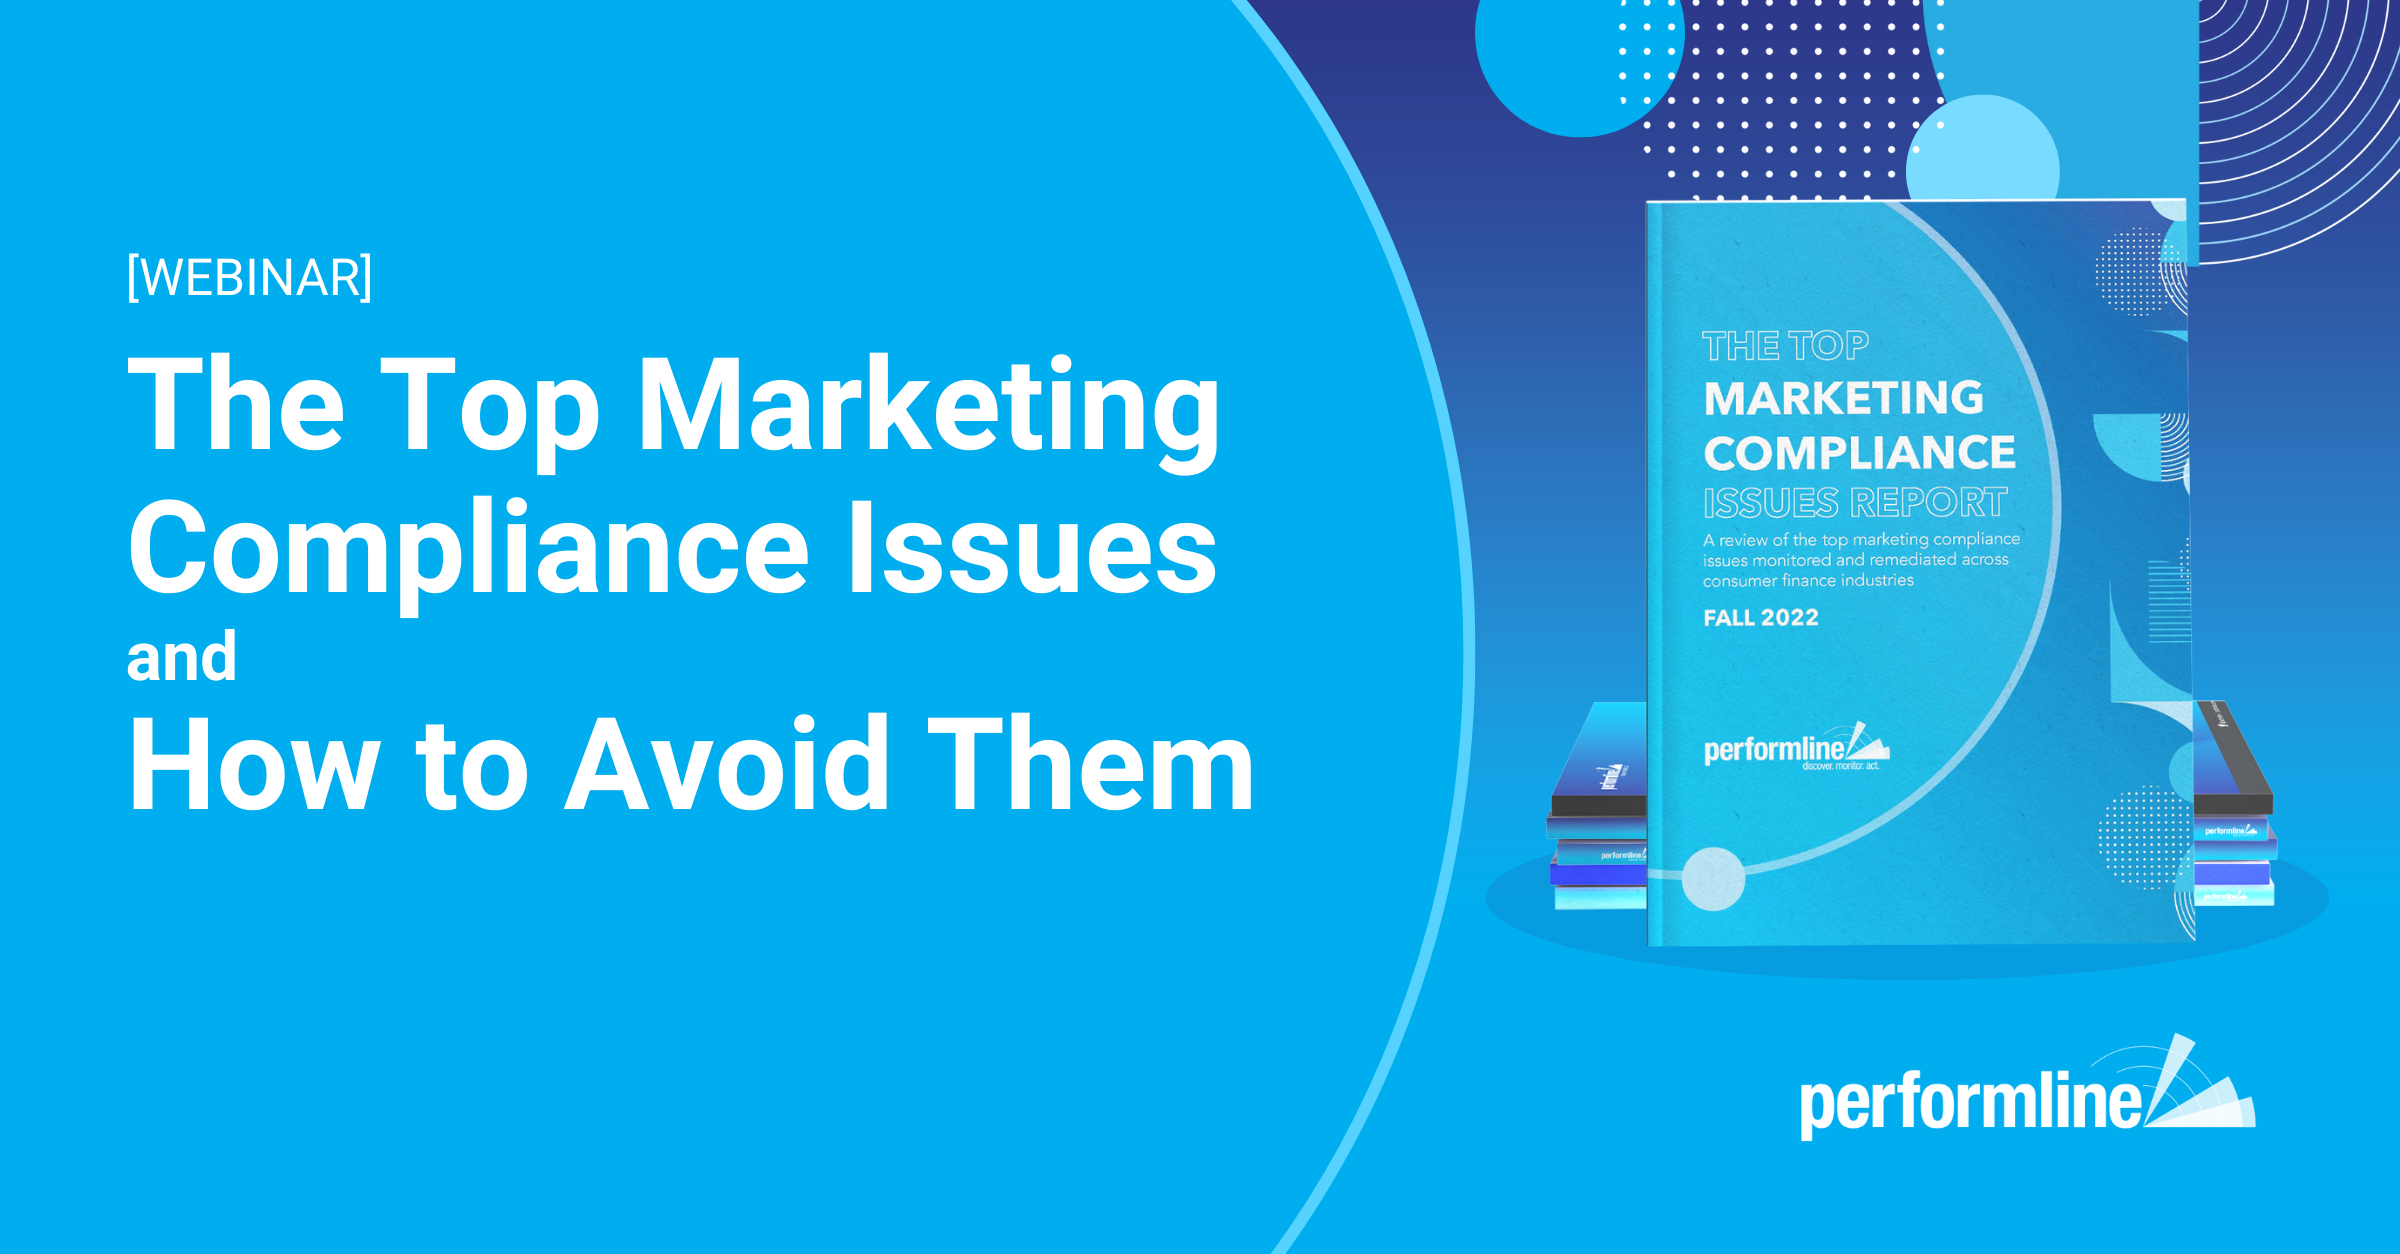 The Top Marketing Compliance Issues and How To Avoid Them Webinar